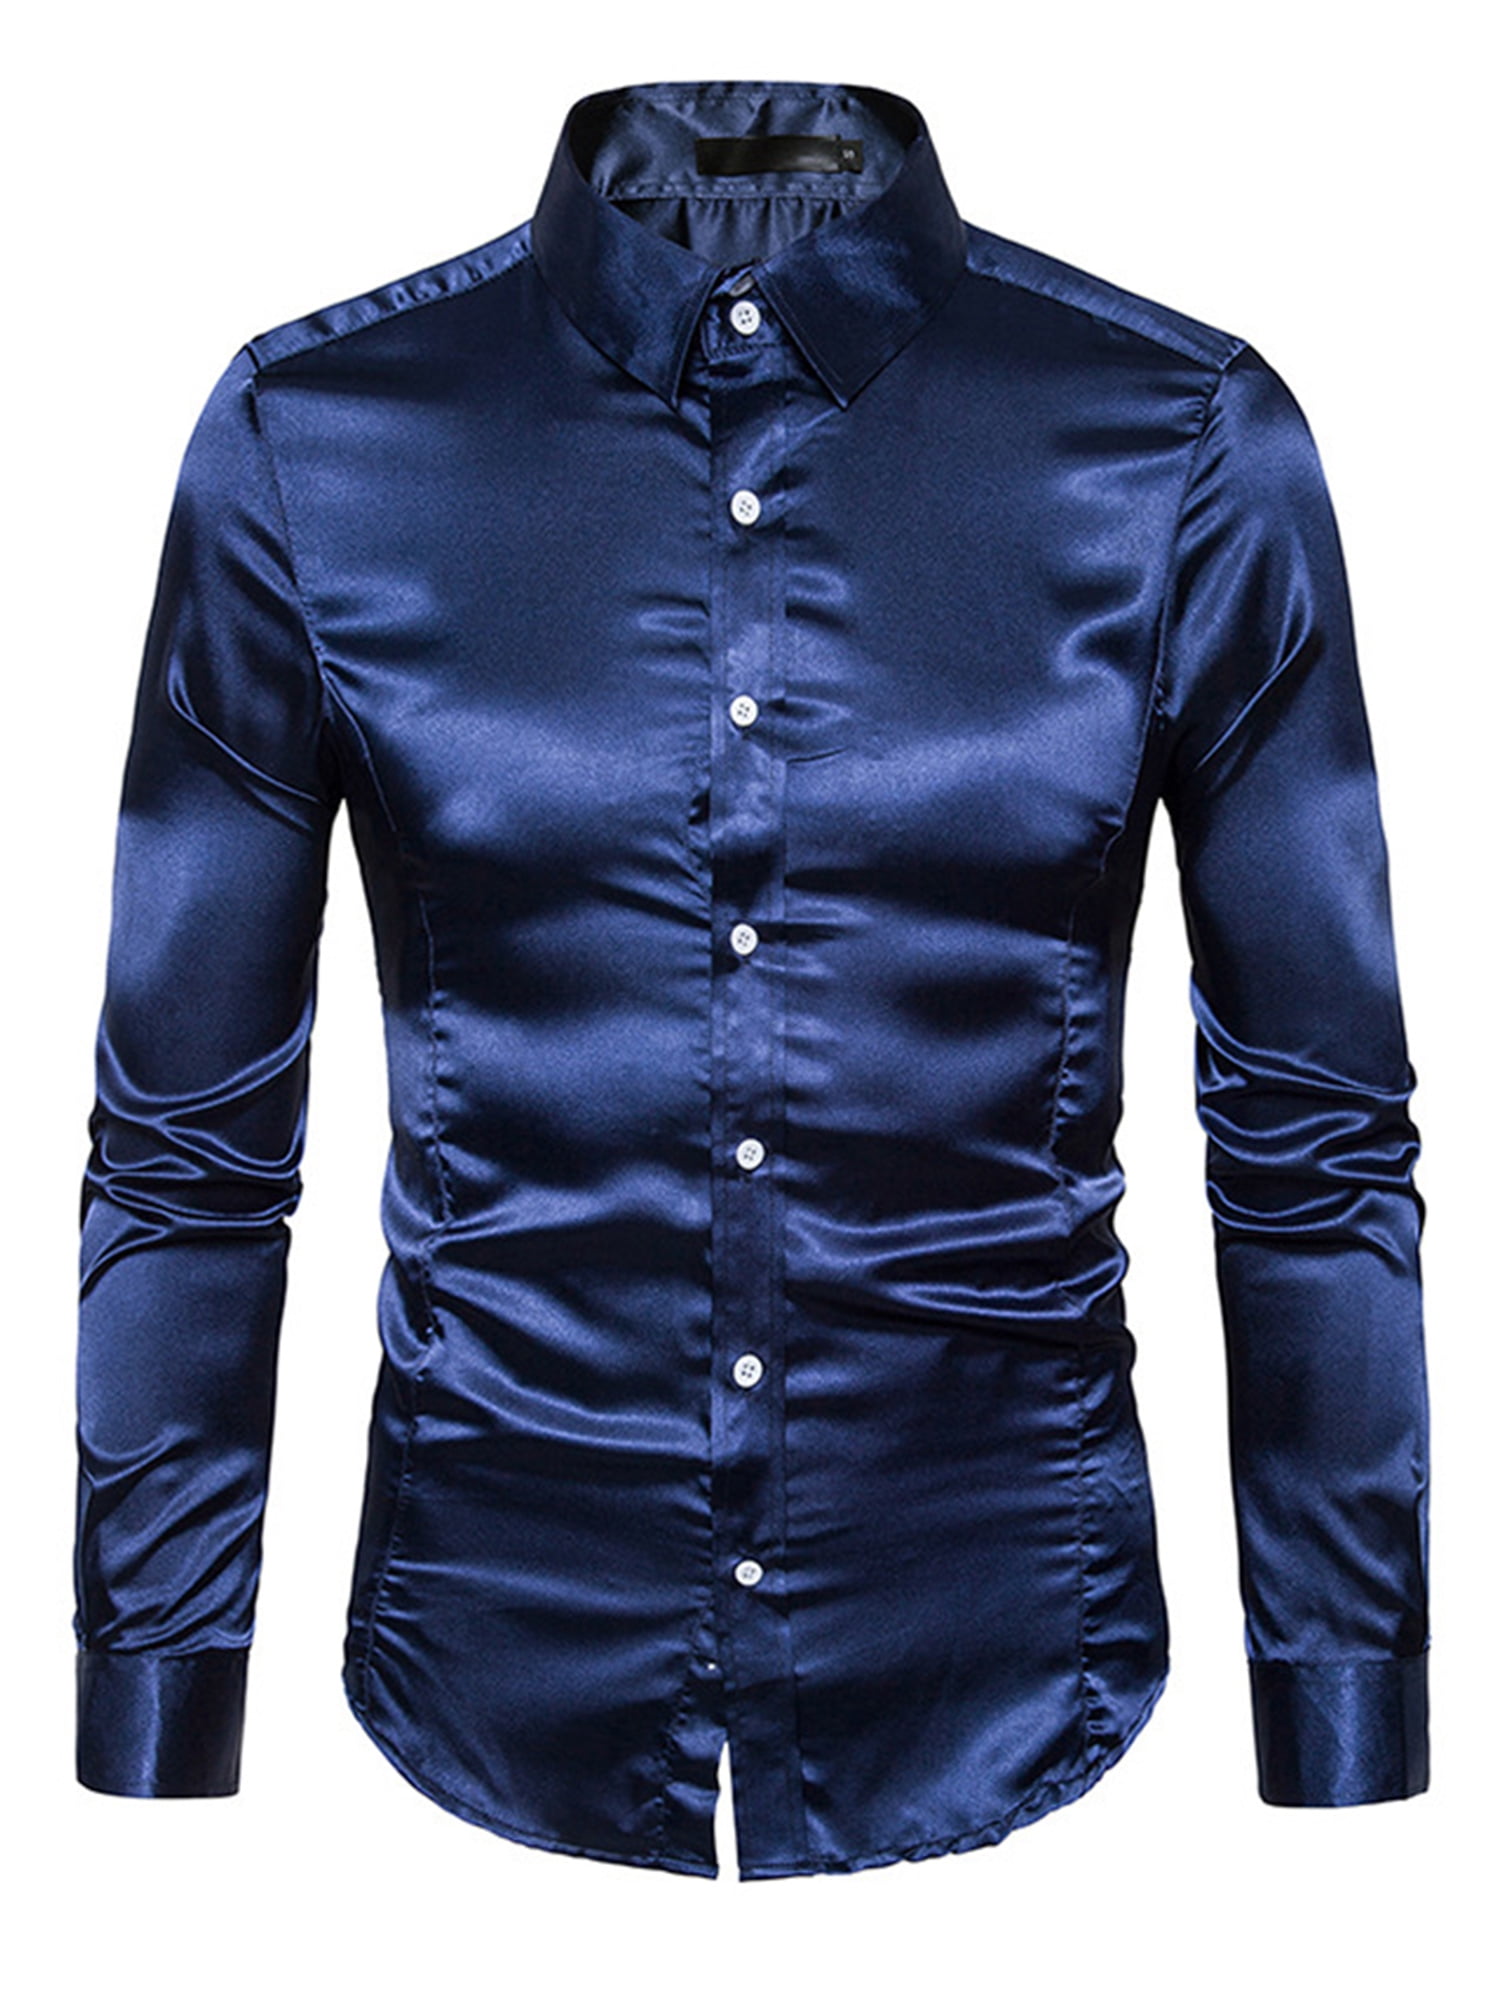 SHOWNO Mens Hip Hop Slim Fitted Long Sleeve Button Down Shirts